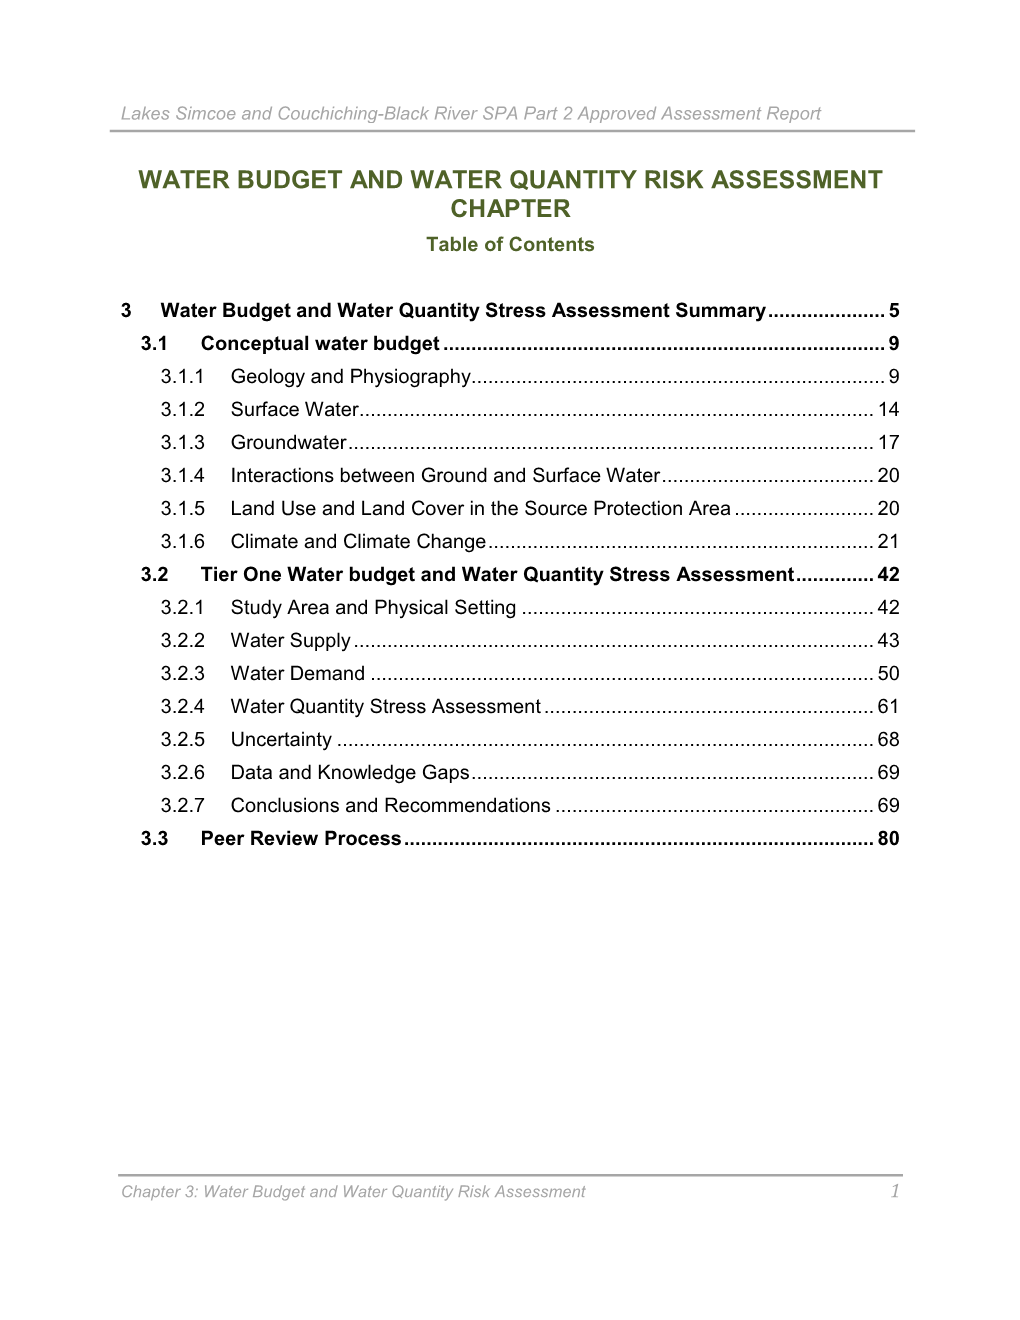 Lakes Simcoe and Couchiching-Black River SPA Part 2 Approved Assessment Report